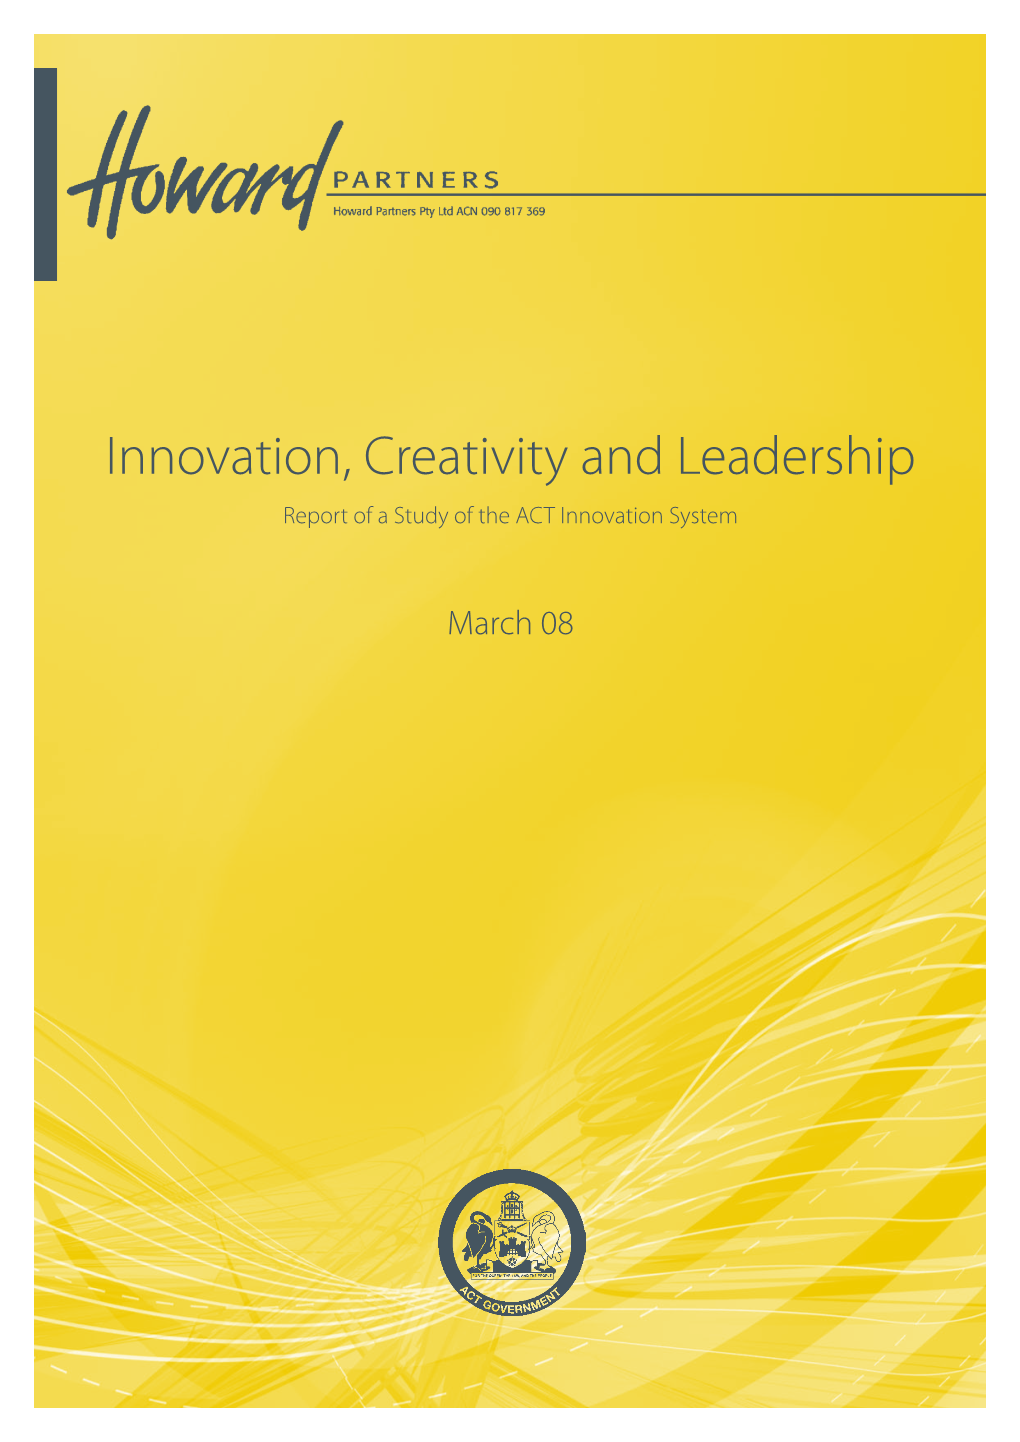 Innovation, Creativity and Leadership Report of a Study of the ACT Innovation System